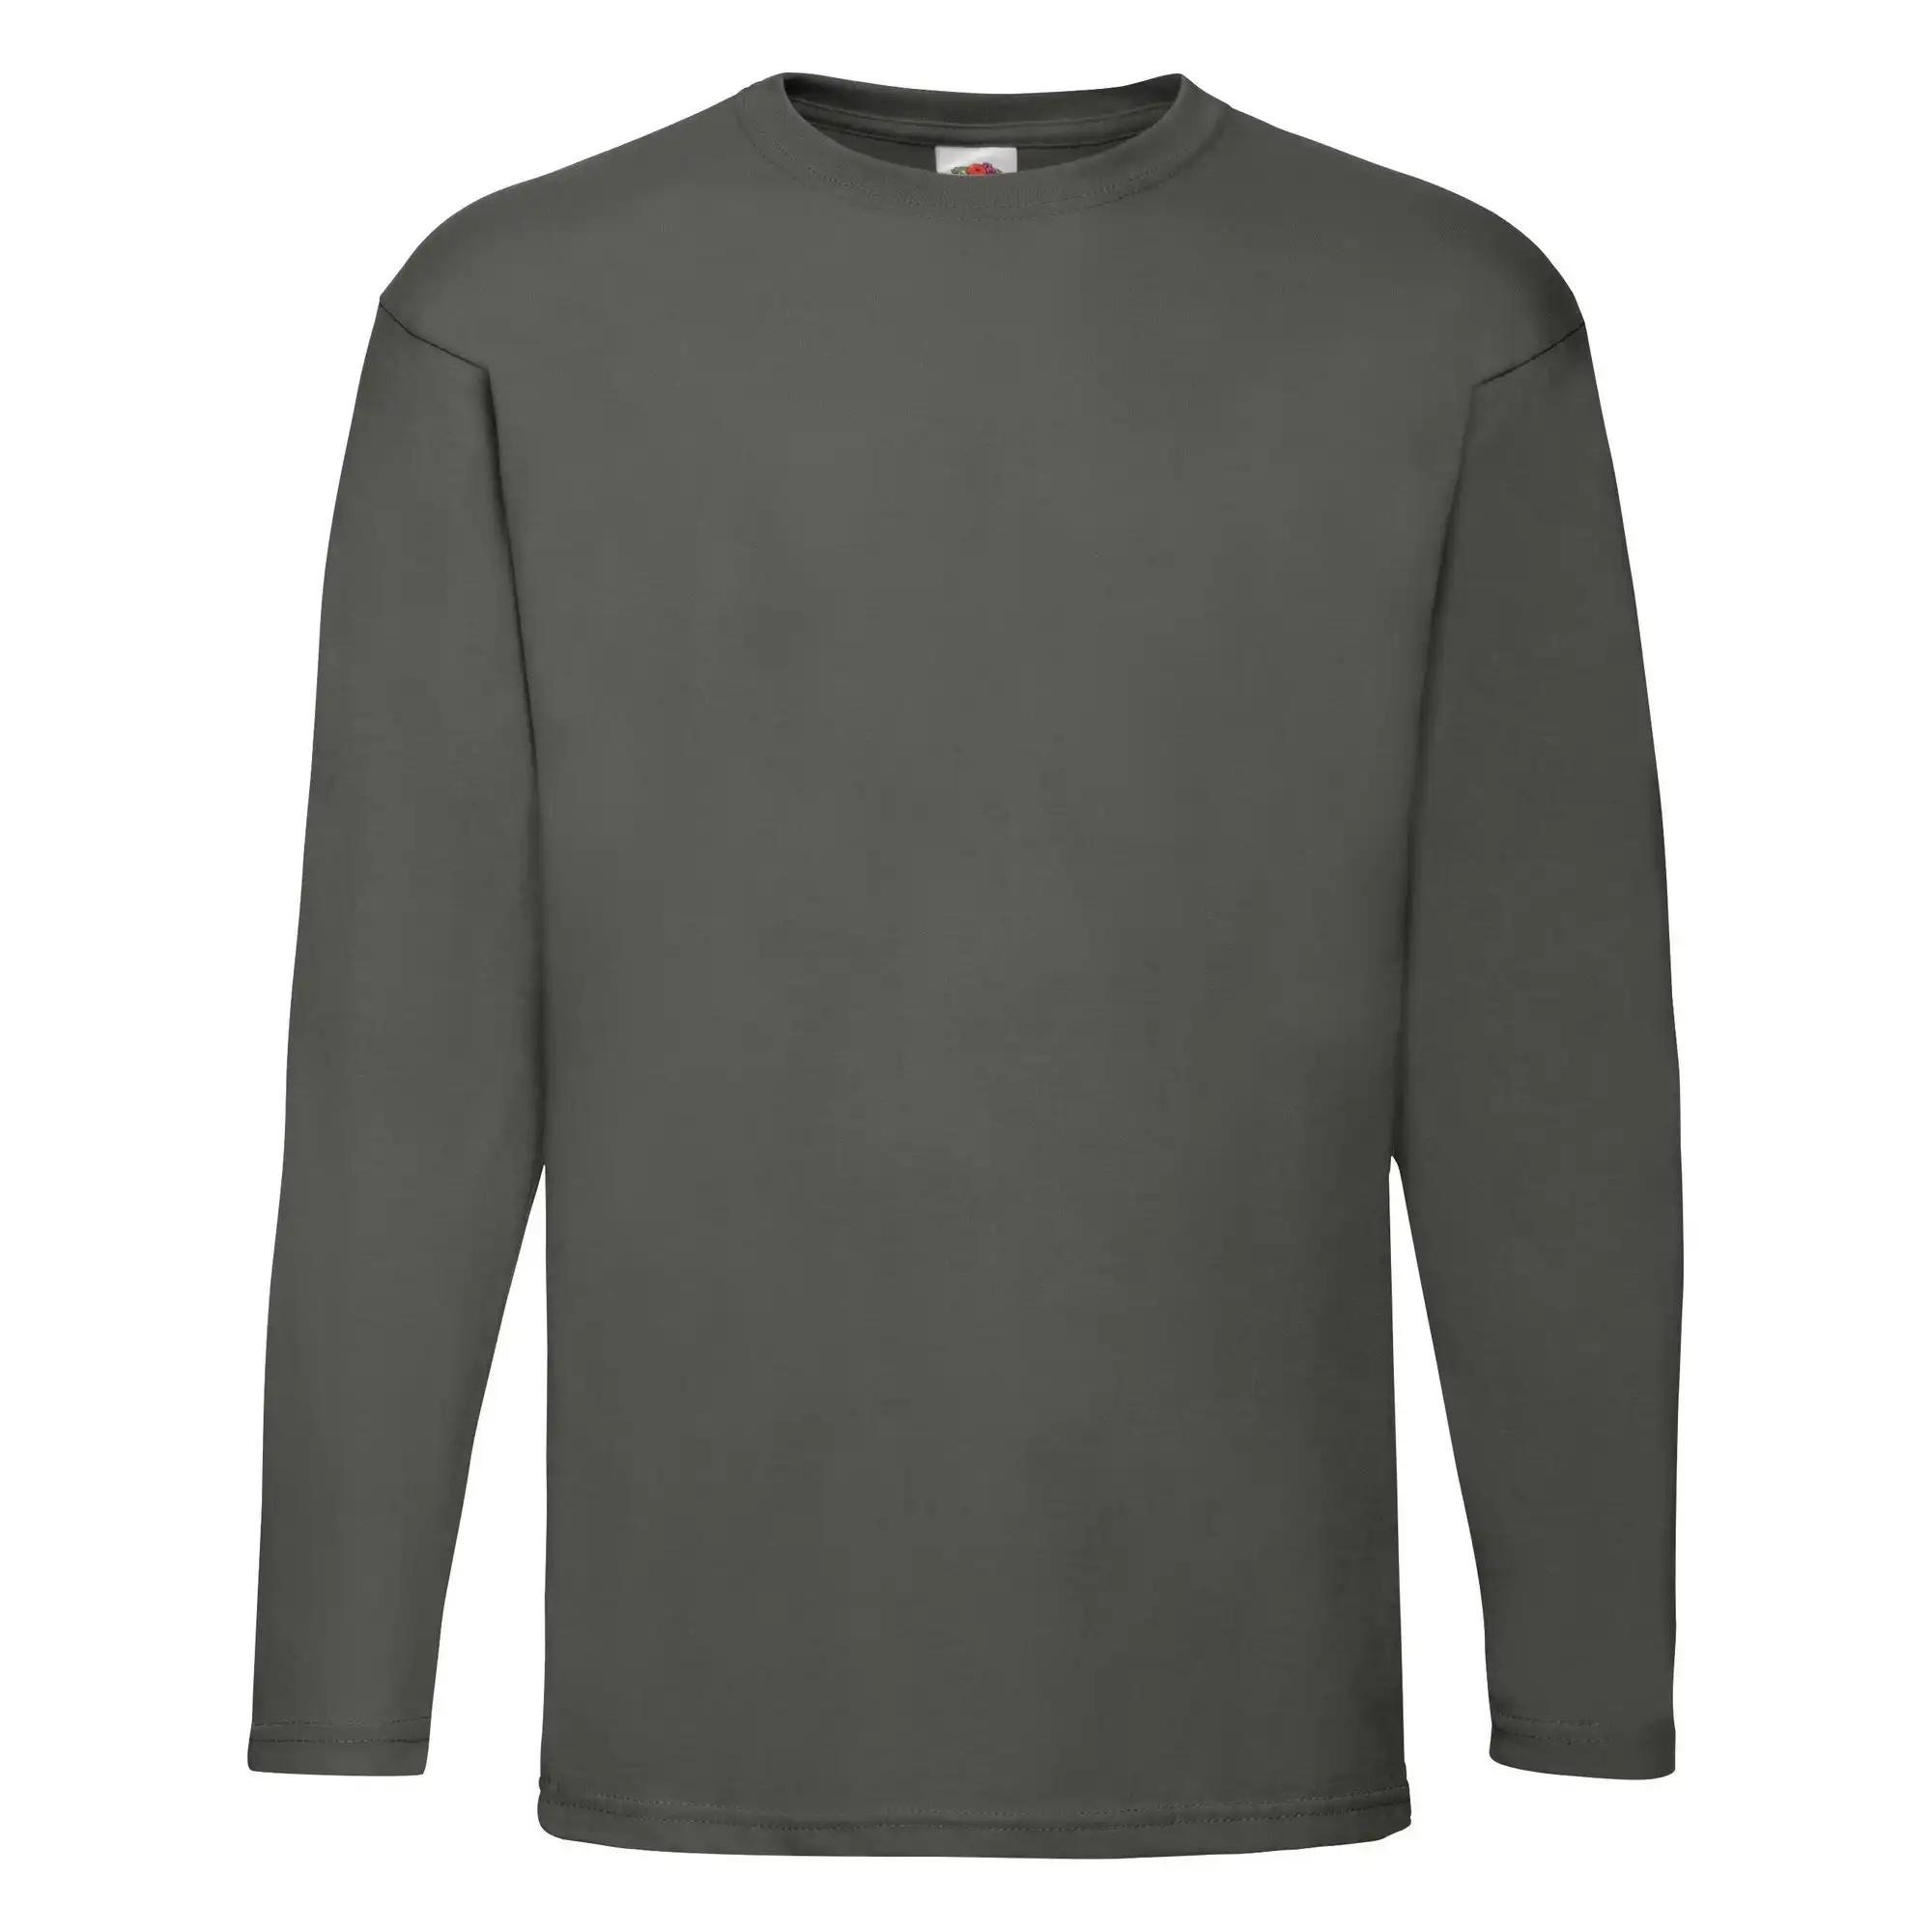 Fruit of the Loom Mens Valueweight Crew Neck Long Sleeve T-Shirt